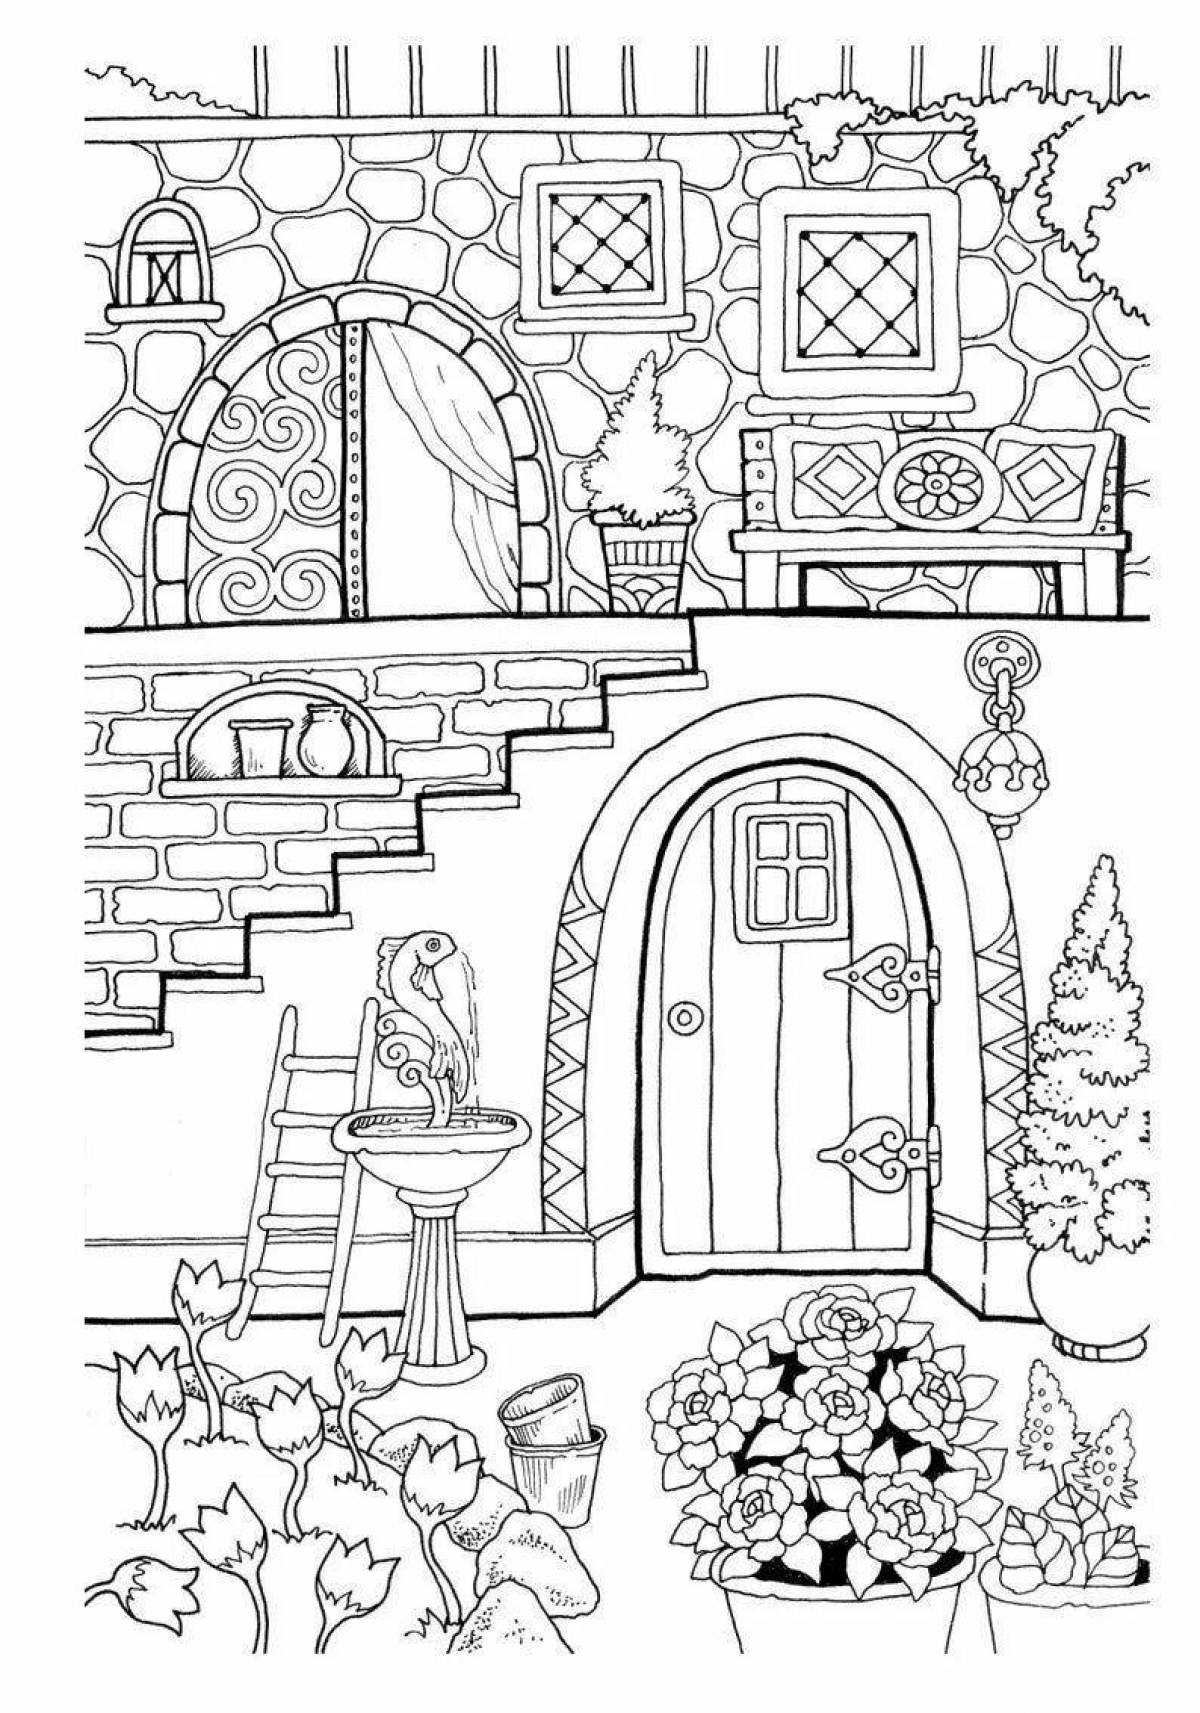 Cheerful cozy coloring book